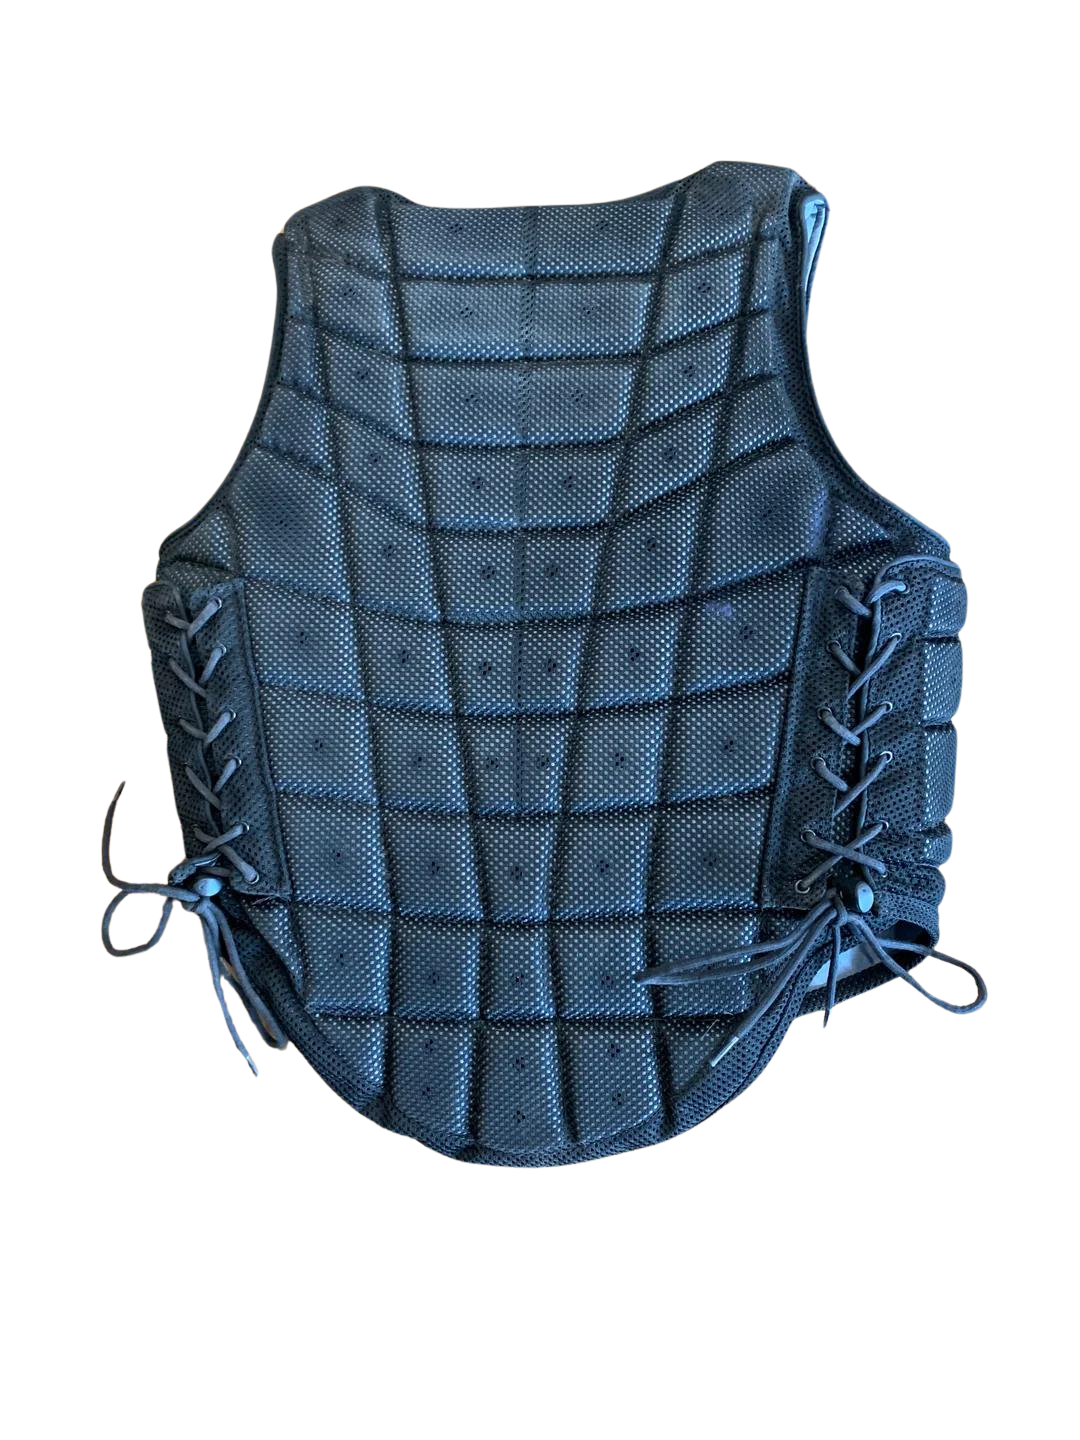 PRE-LOVED CHAMPION TI22 ADULT TITANIUM BODY PROTECTOR SAFETY VEST